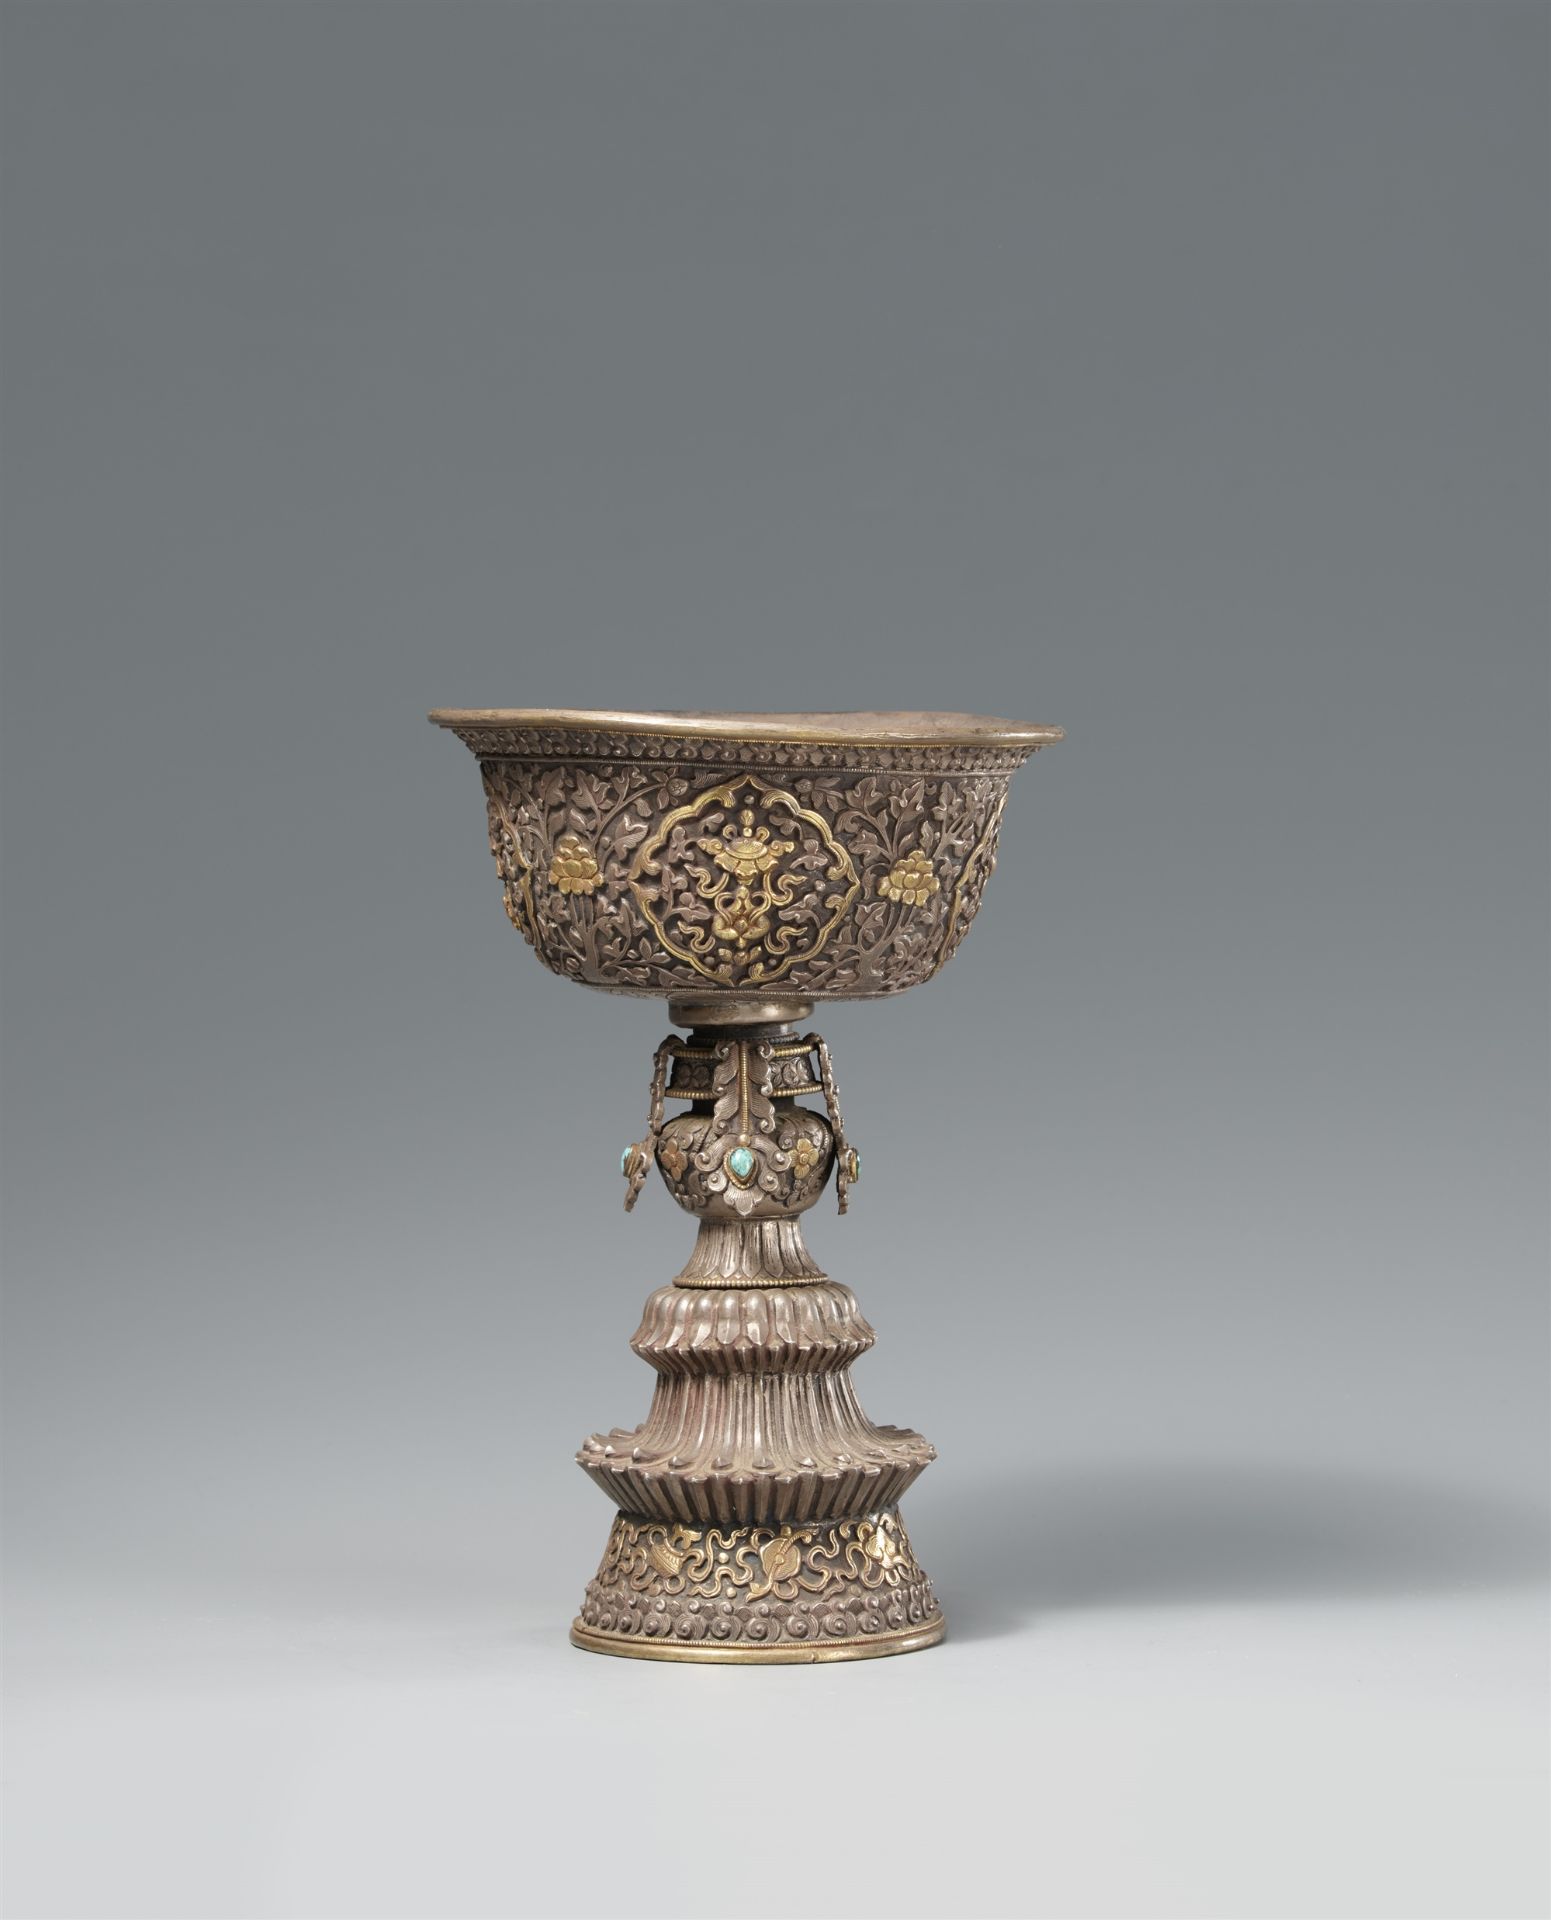 A bajixiang repoussé butter lamp (offering lamp). Tibet, 19th century - Image 2 of 4